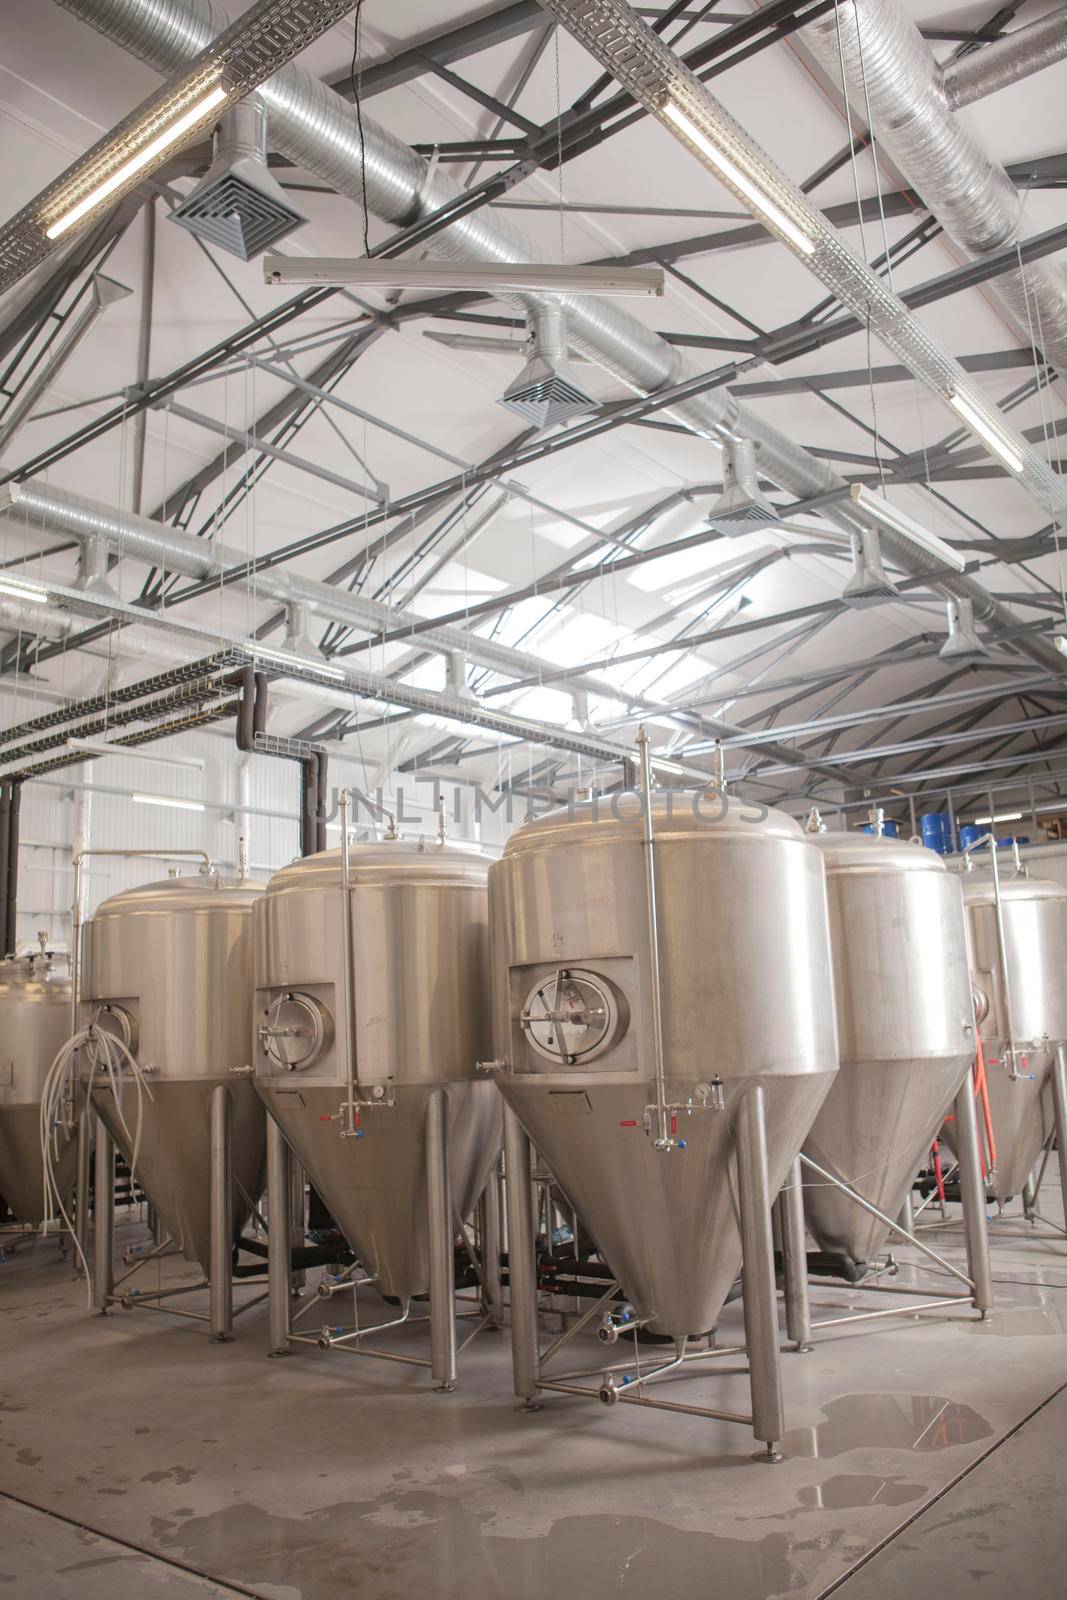 Vertical full length shot of beer tanks at microbrewery production plant